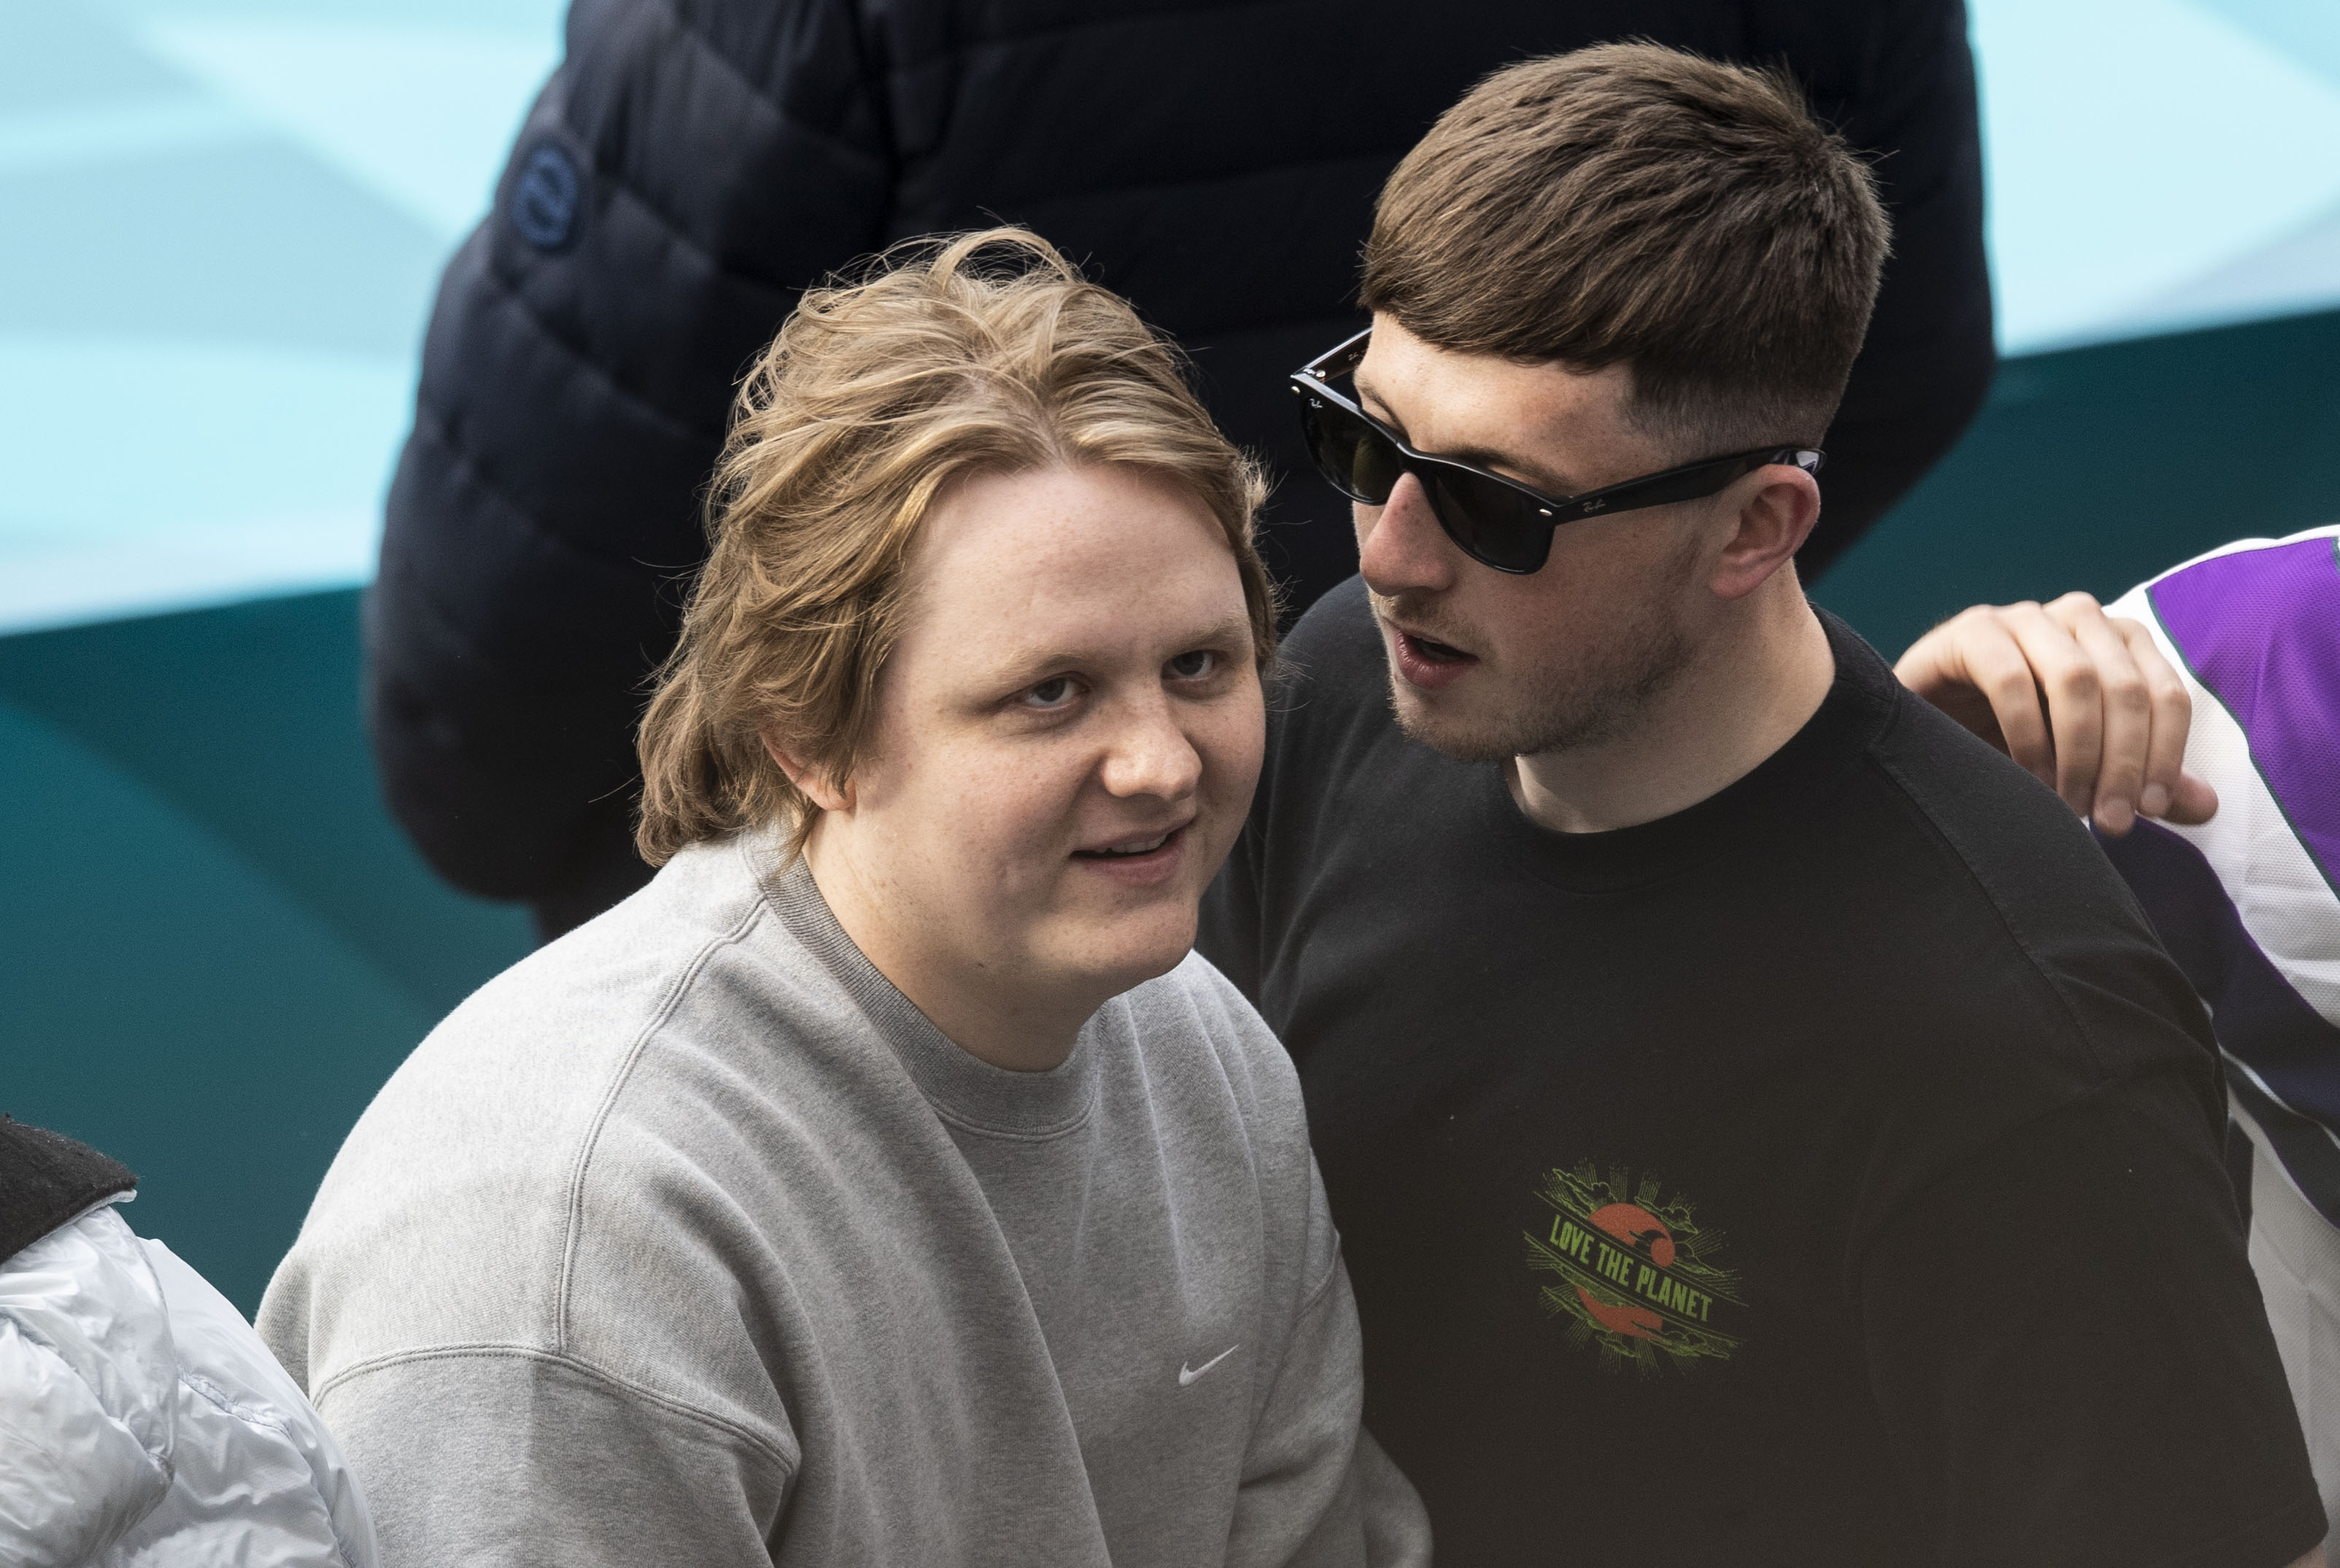 Lewis Capaldi joins fans at Hampden ahead of Scotland's Euro 2020 clash with Croatia.